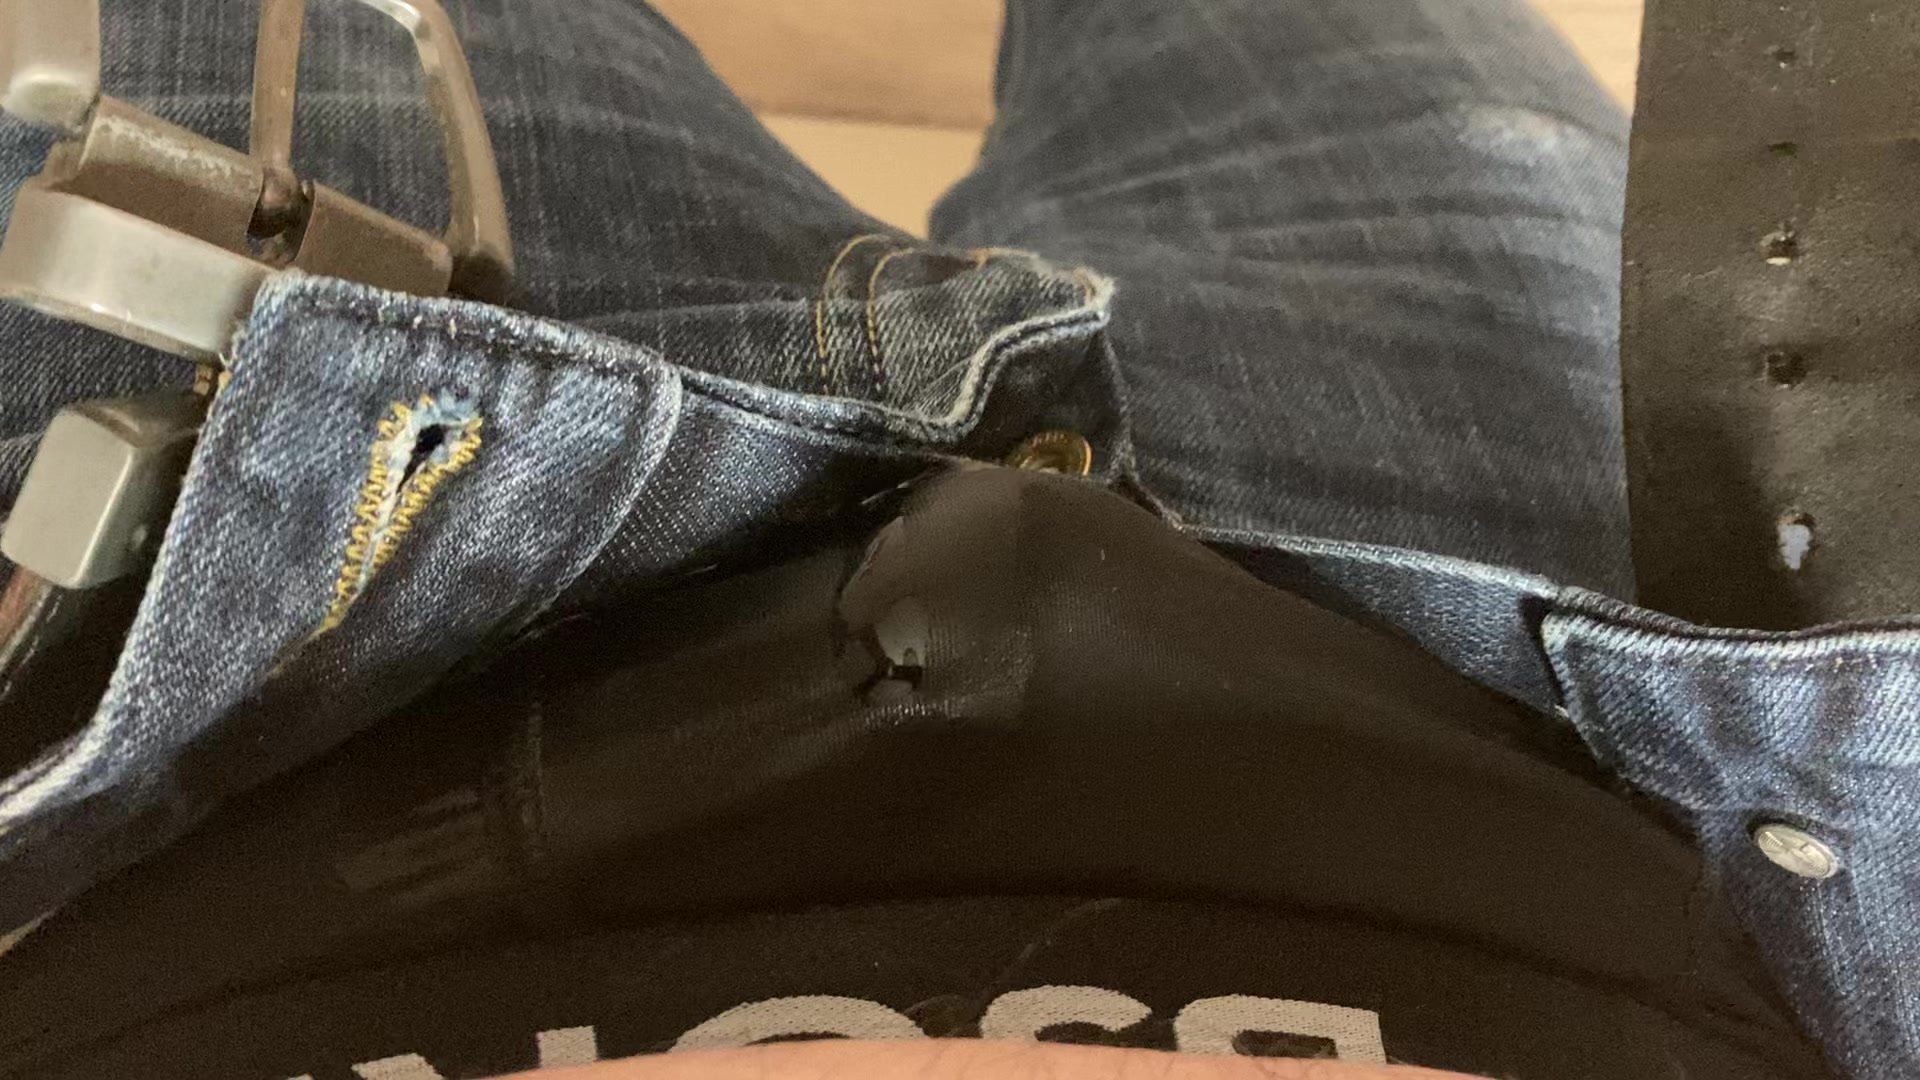 Quick piss in my jeans :)